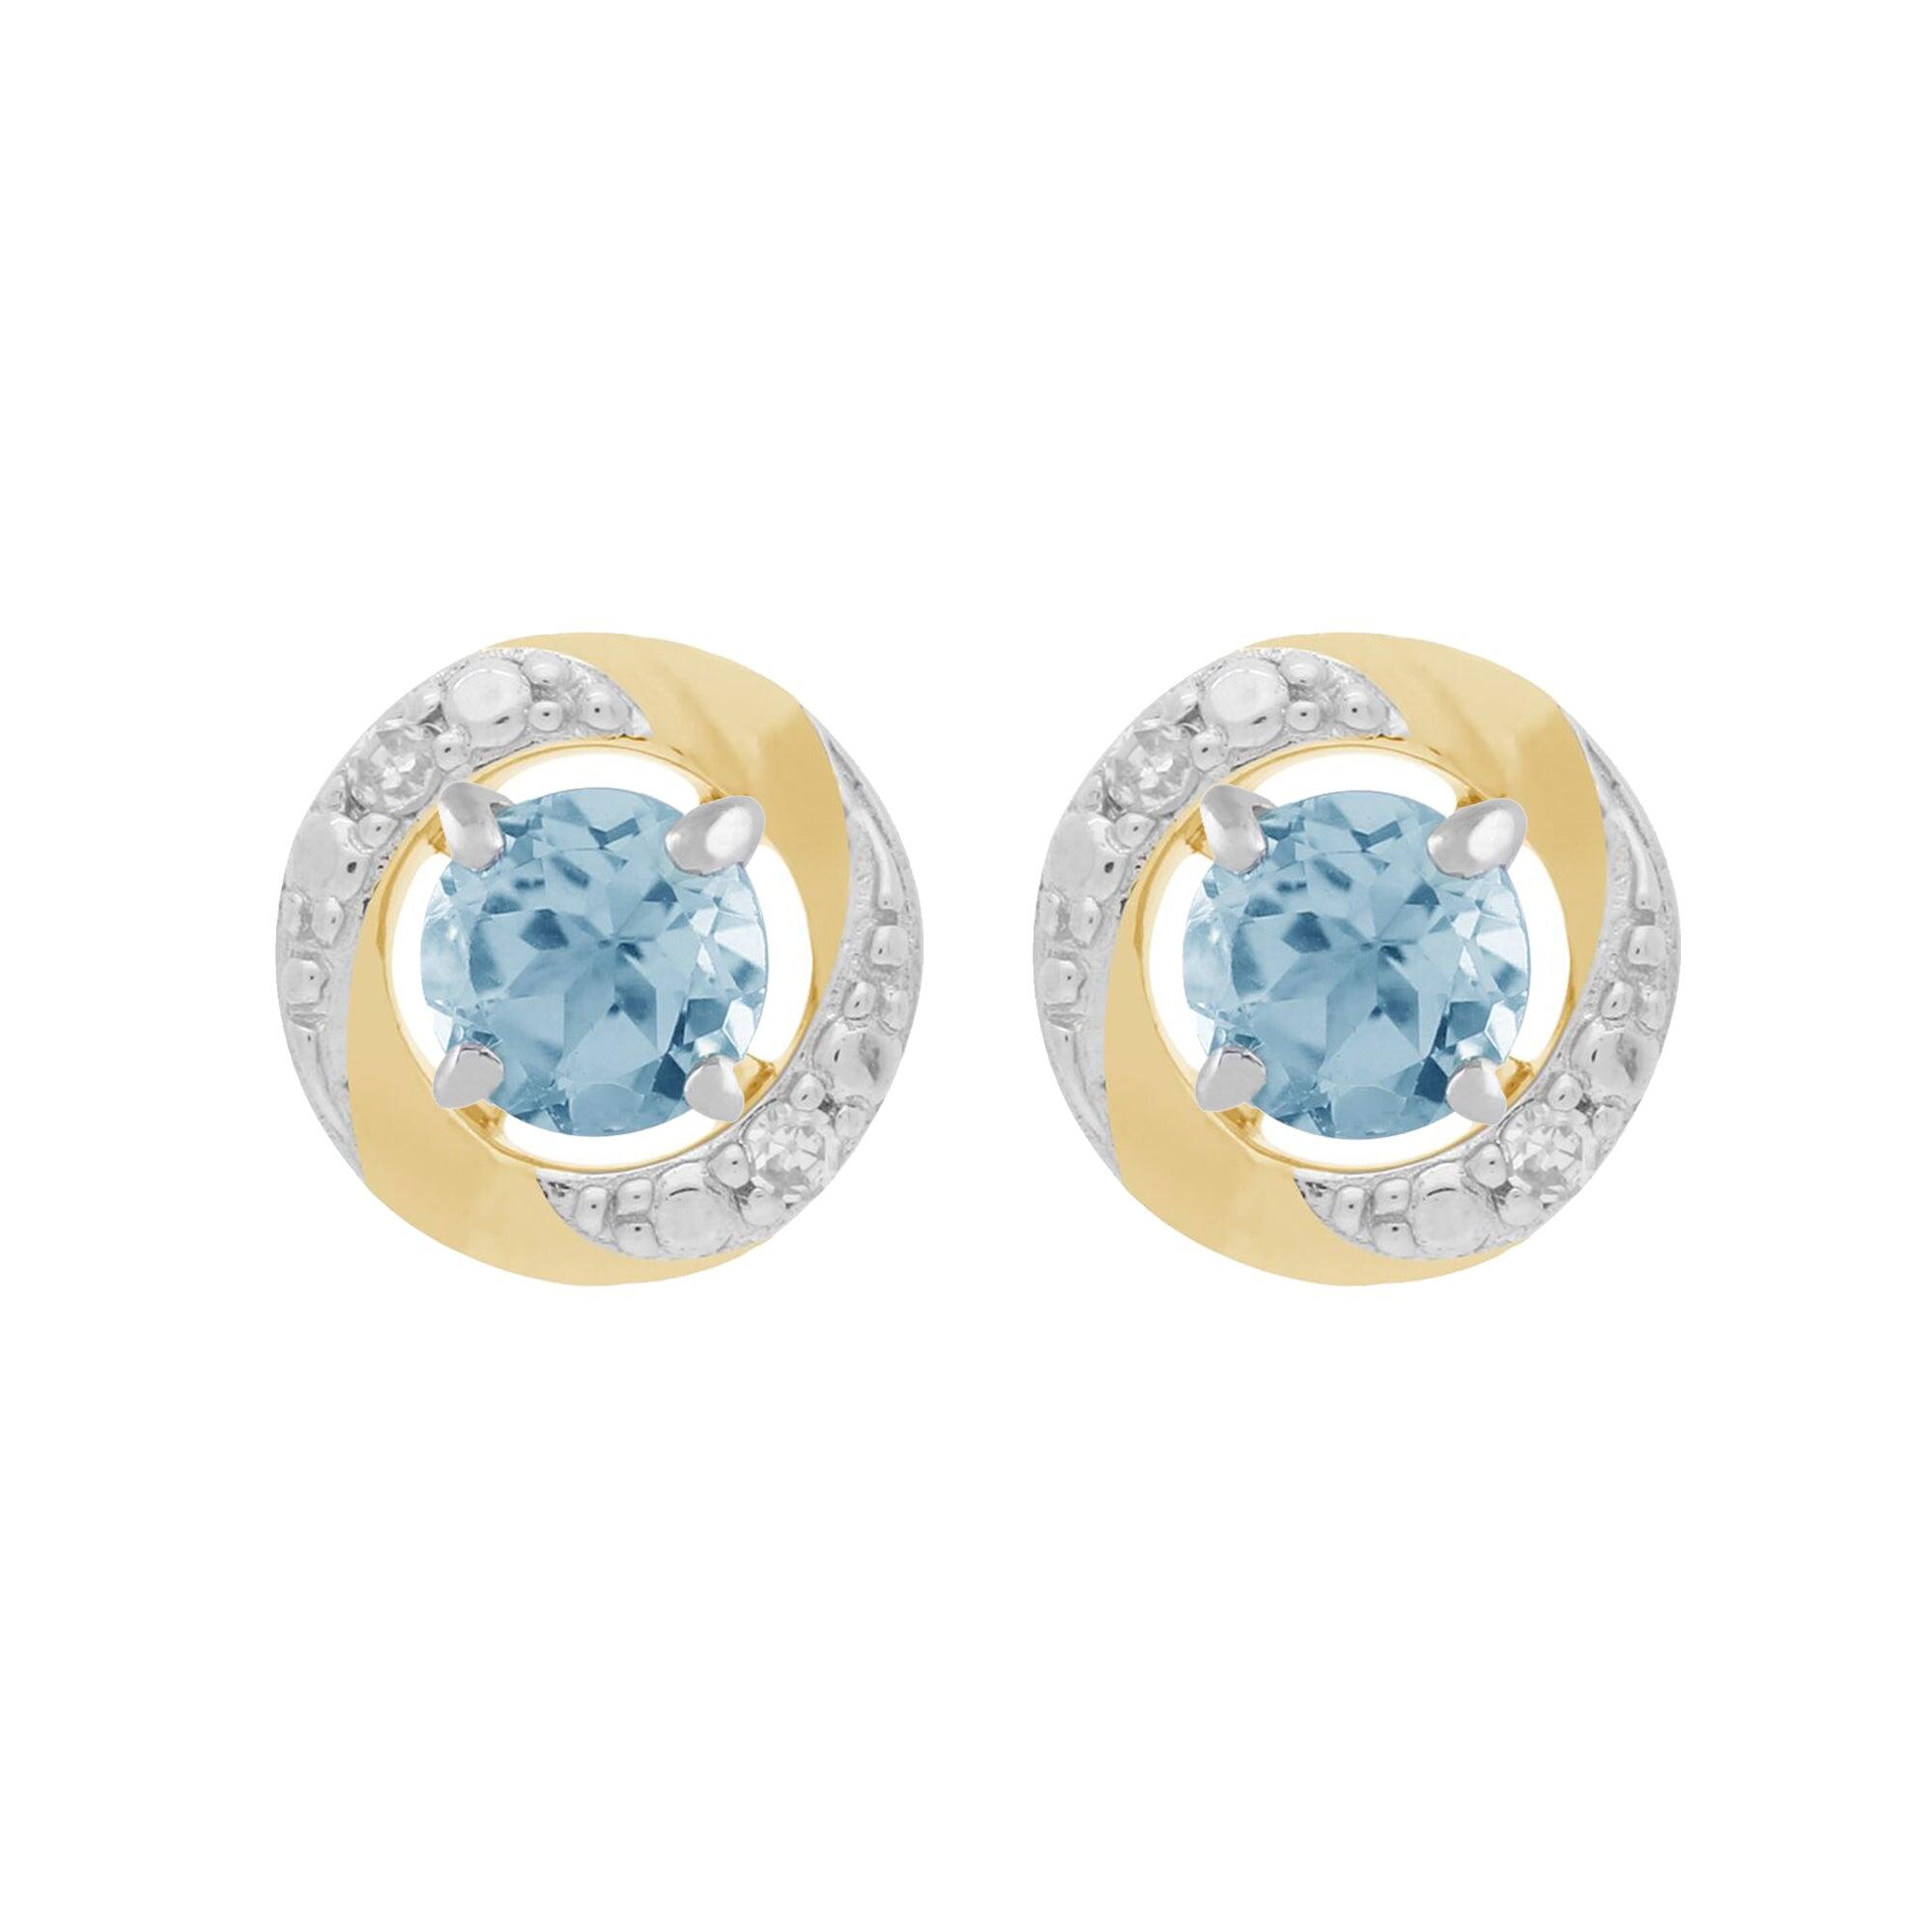 9ct White Gold Blue Topaz Stud Earrings with Detachable Diamond Halo Ear Jacket in 9ct Yellow Gold